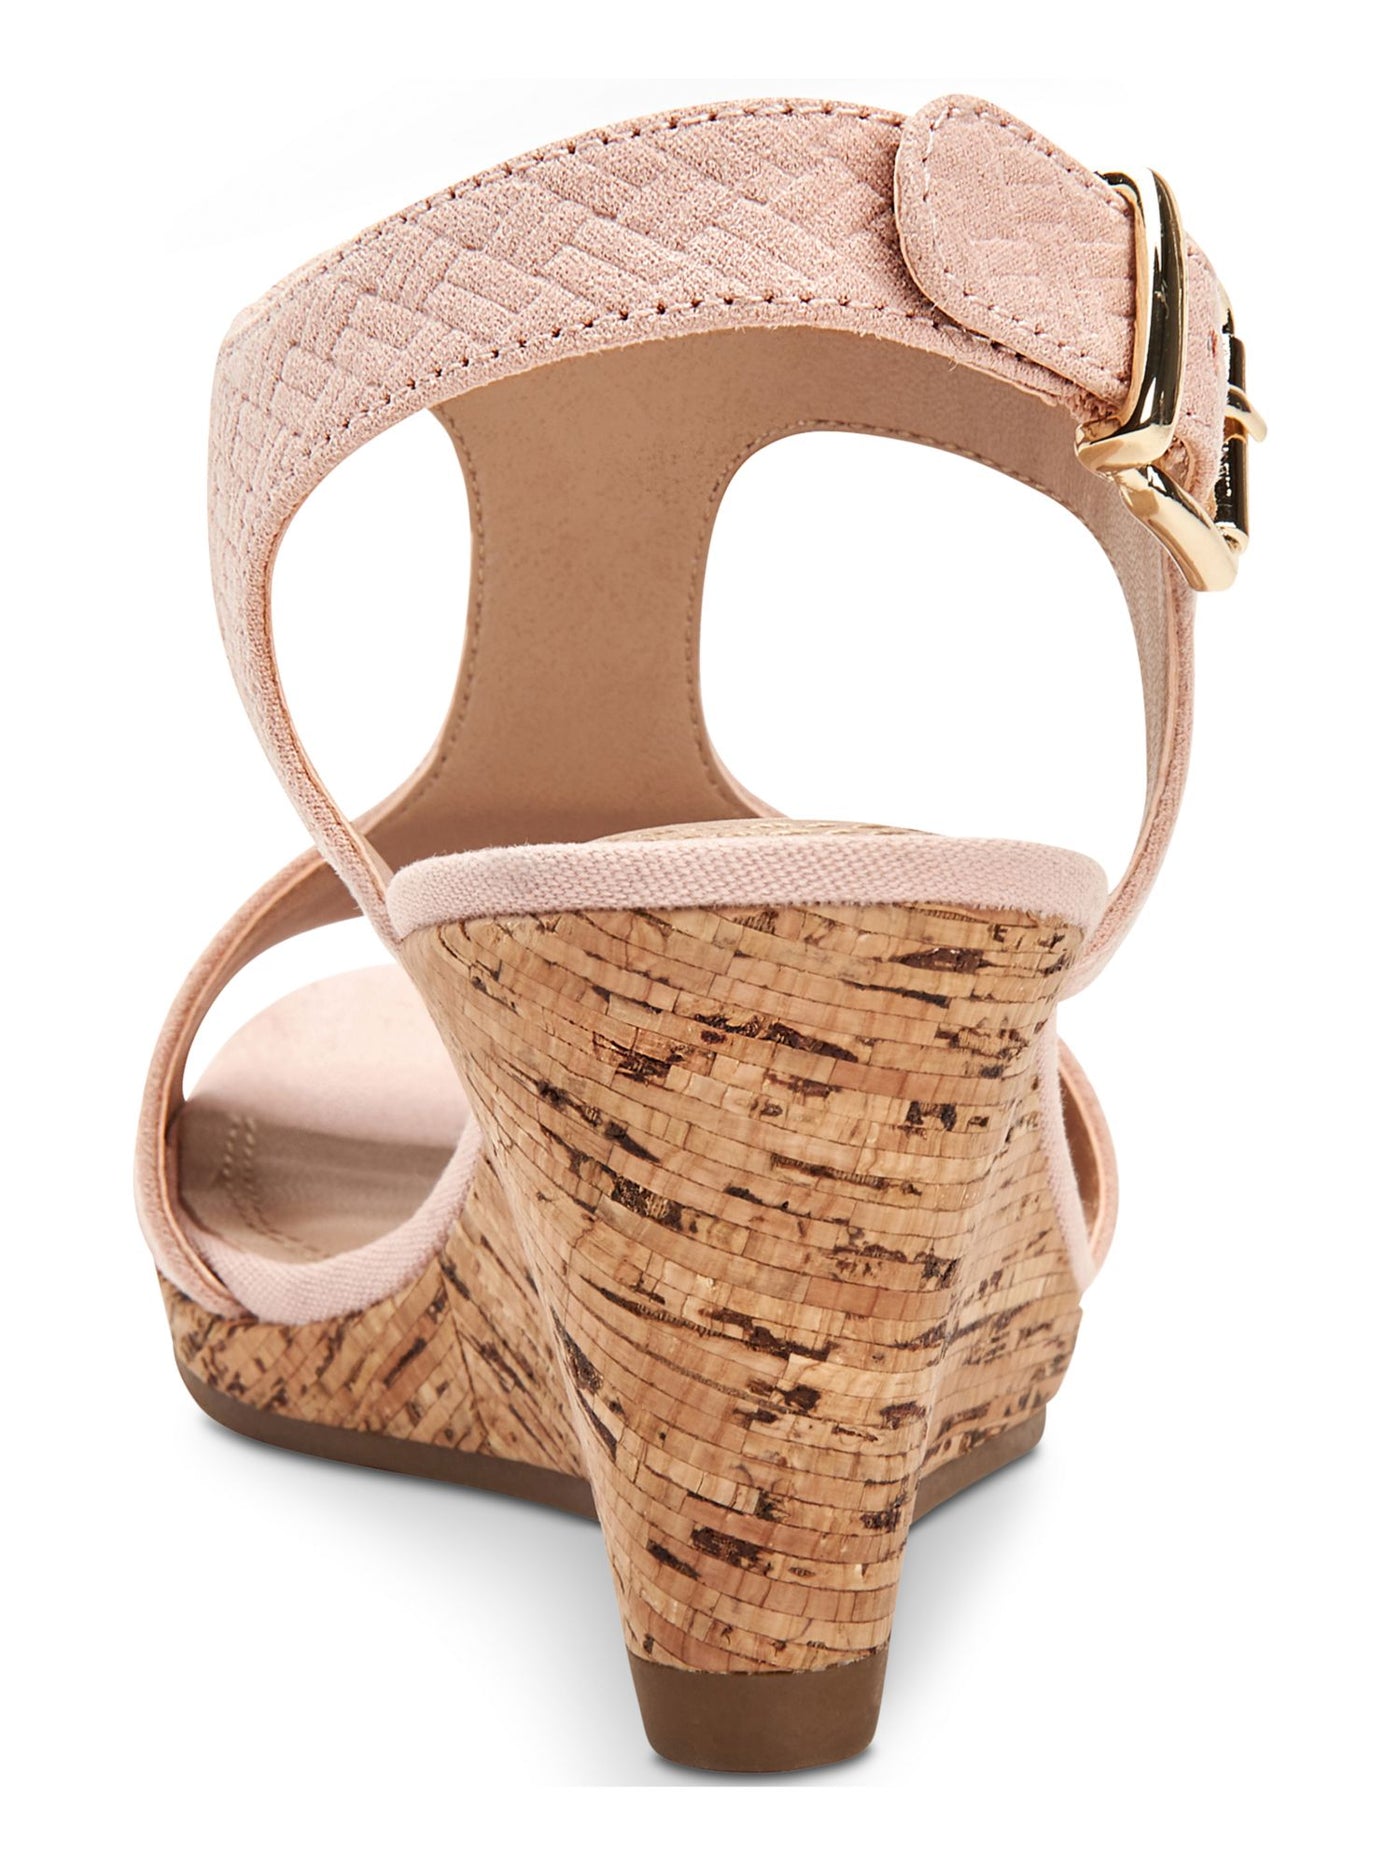 CHARTER CLUB Womens Pink Textured Cork T-Strap Comfort Shelbee Round Toe Wedge Buckle Slingback Sandal 7 M